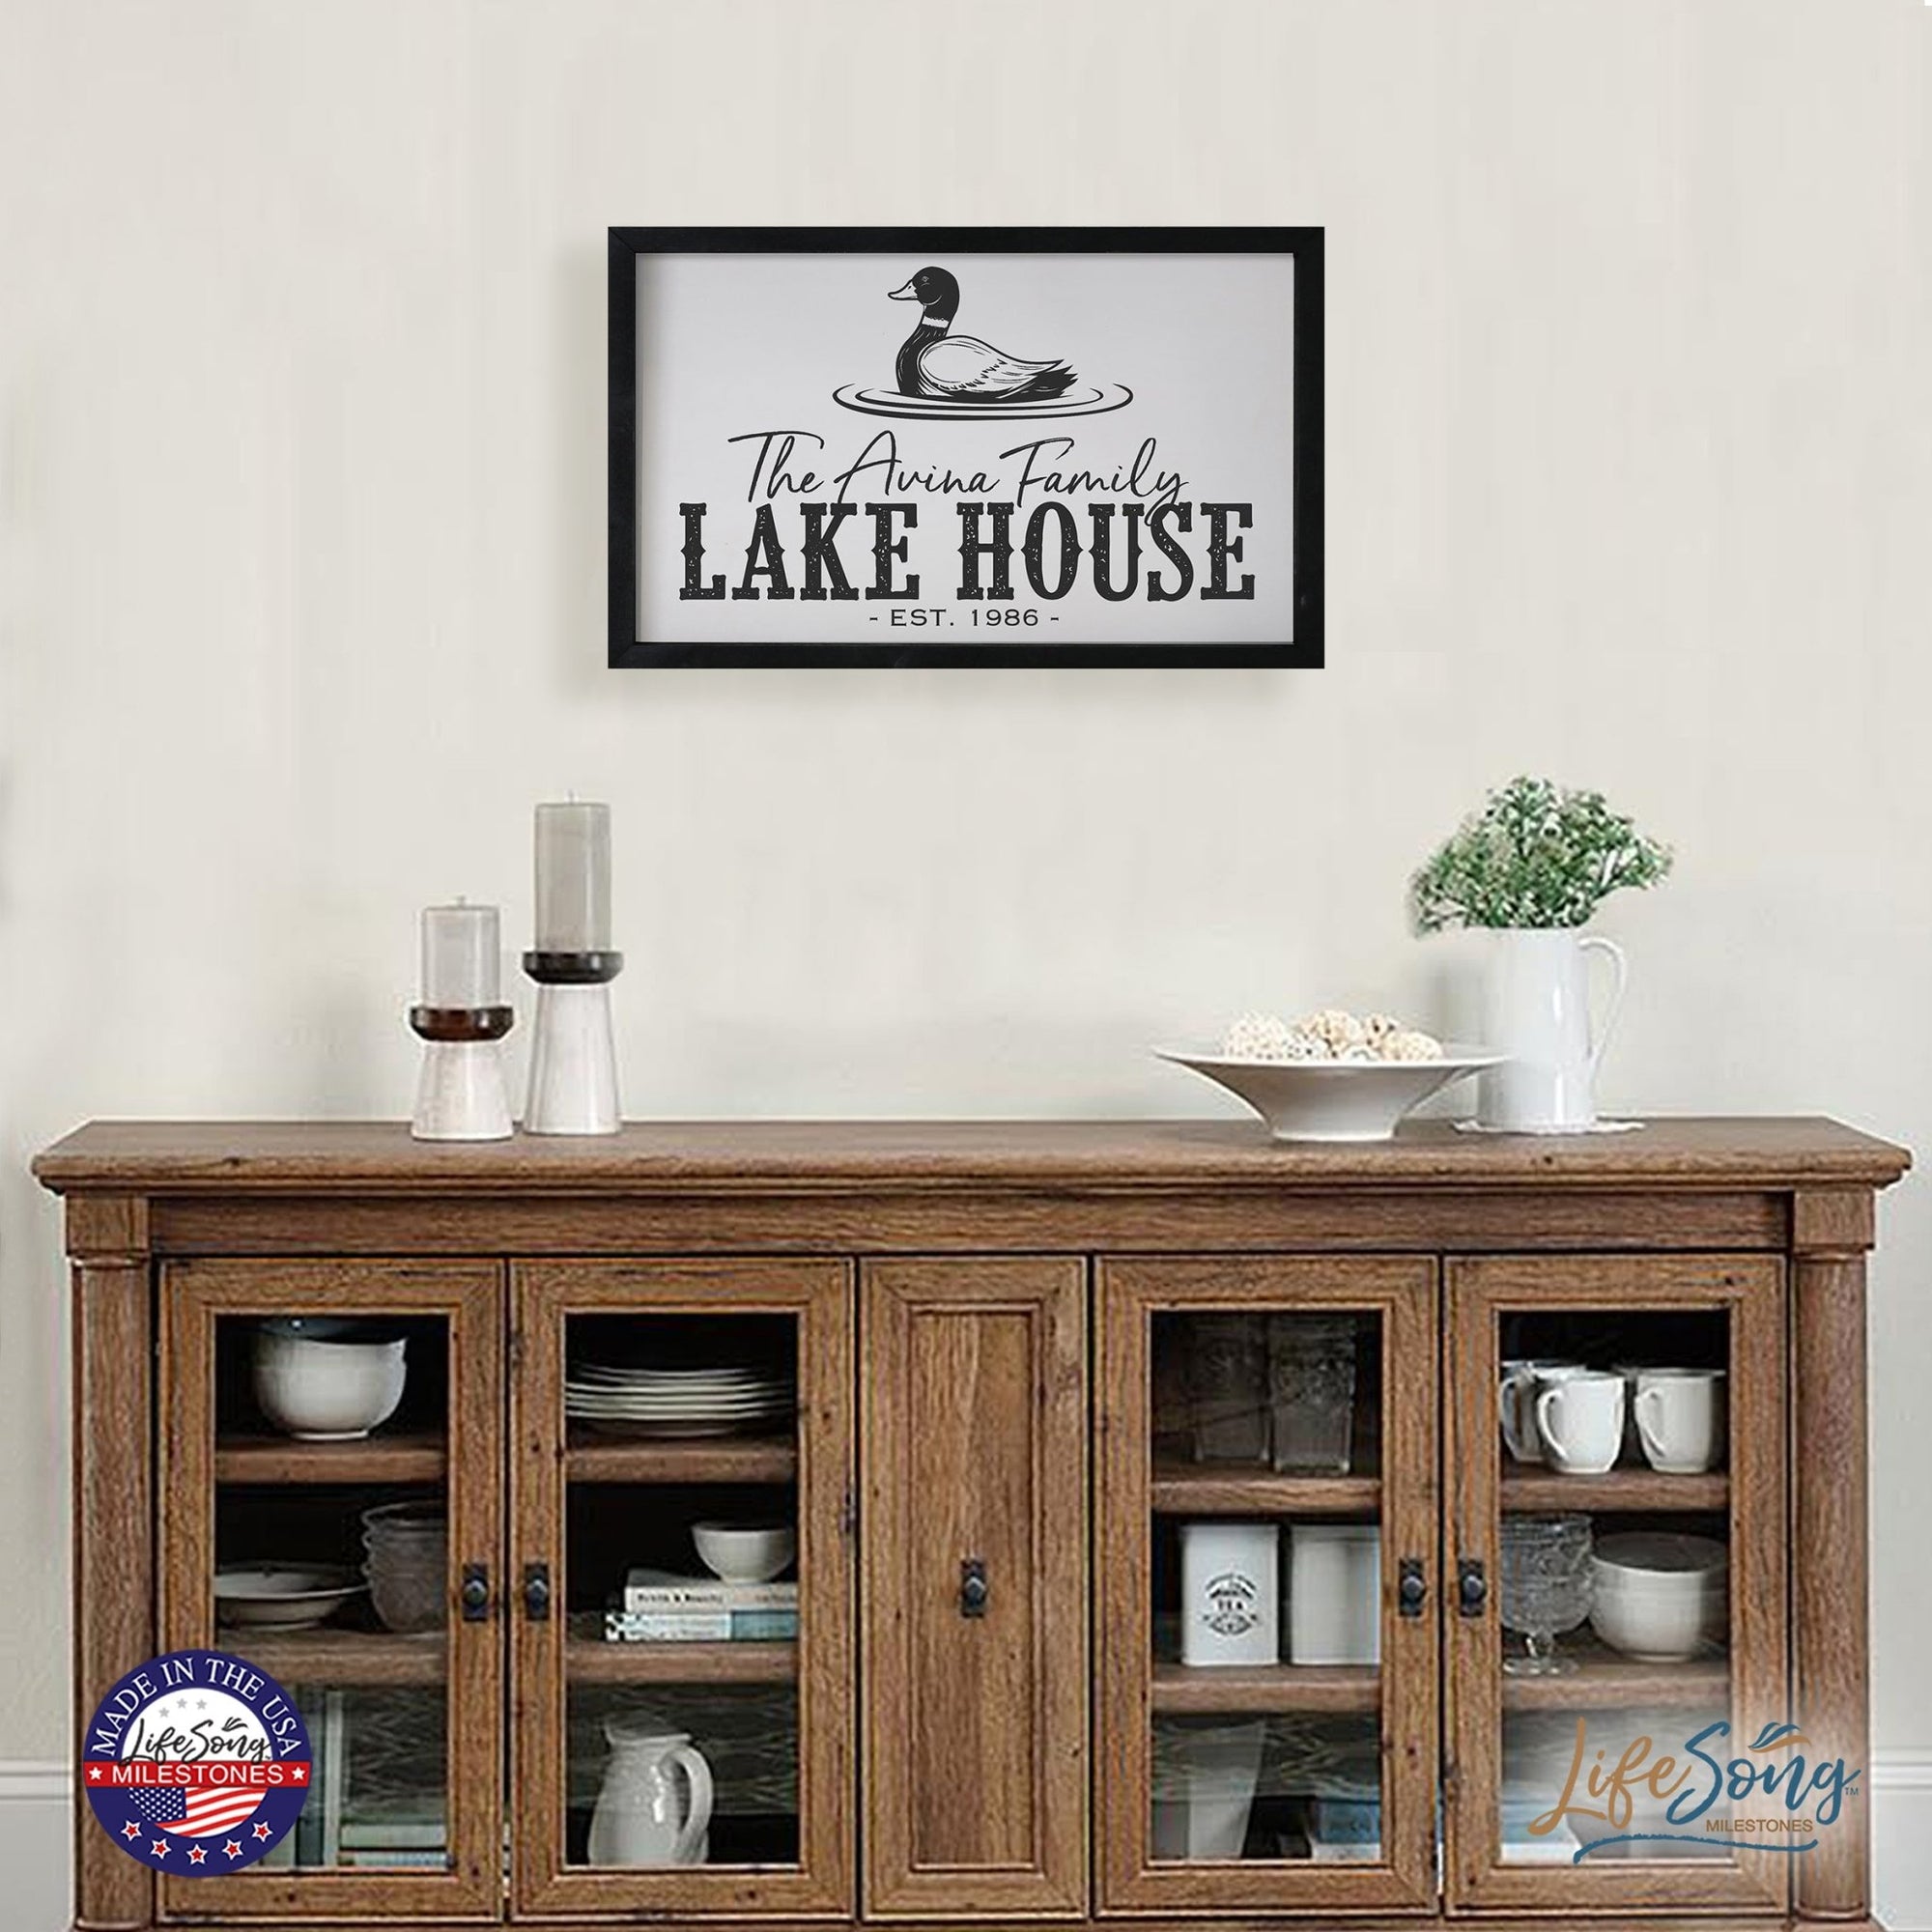 Inspirational Personalized Framed Shadow Box 12x18 - Lake House (Duck) - LifeSong Milestones